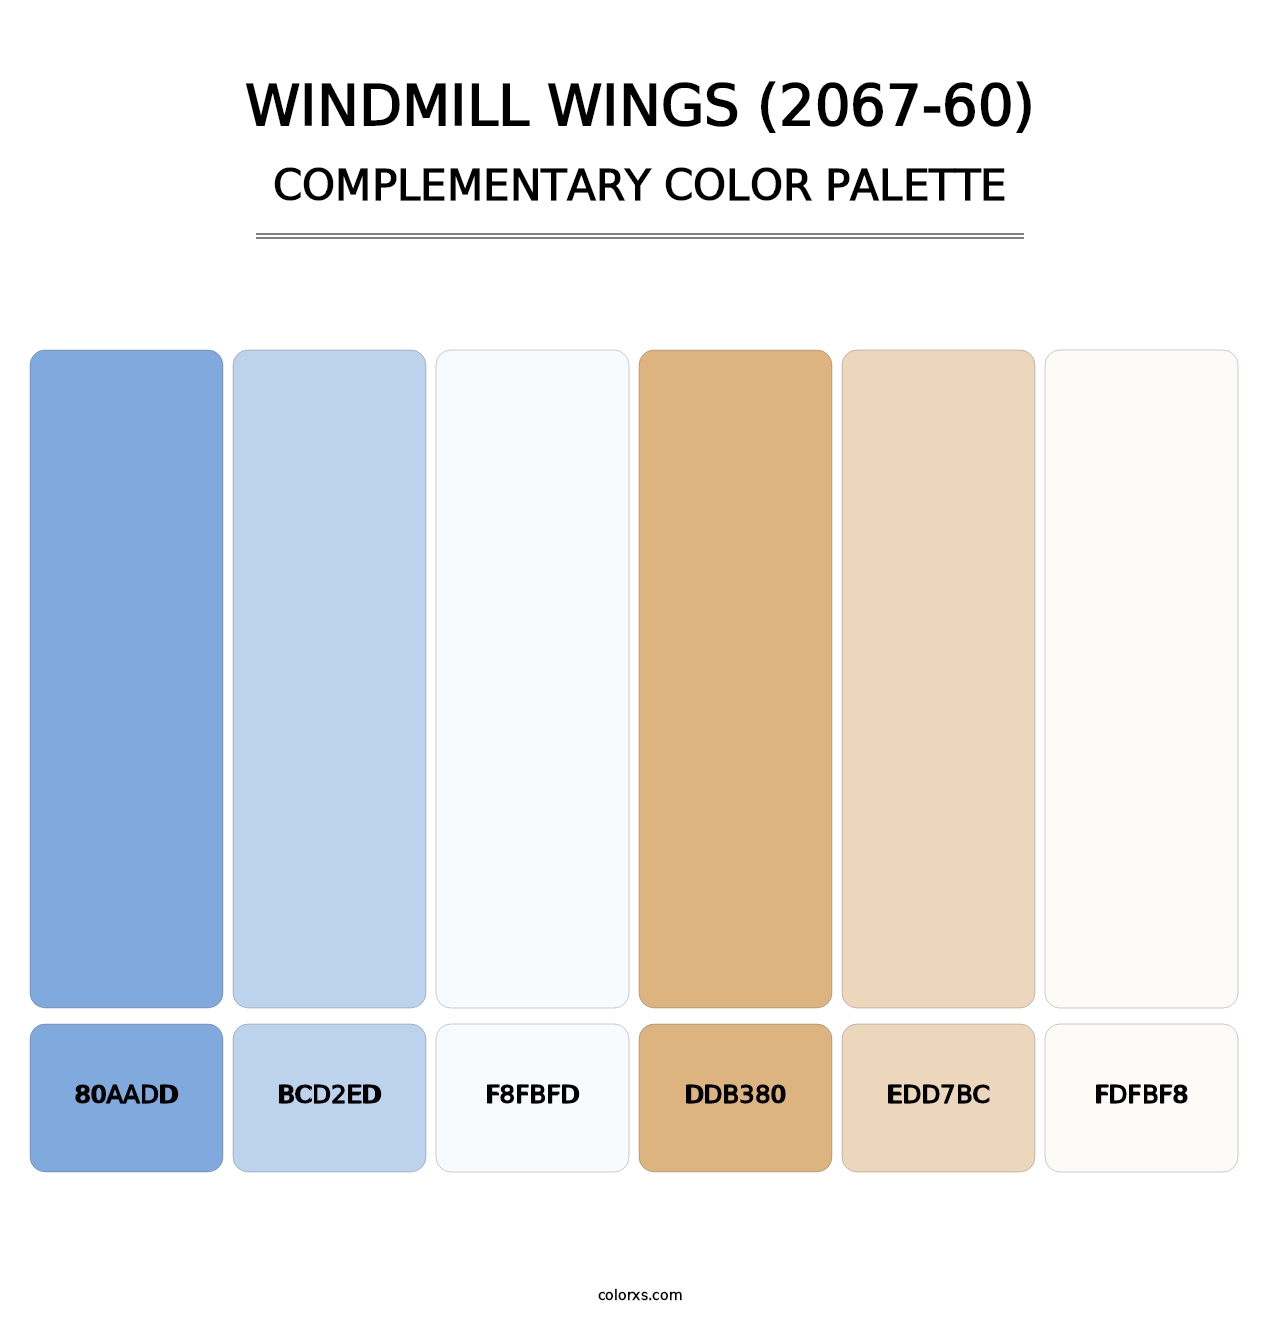 Windmill Wings (2067-60) - Complementary Color Palette